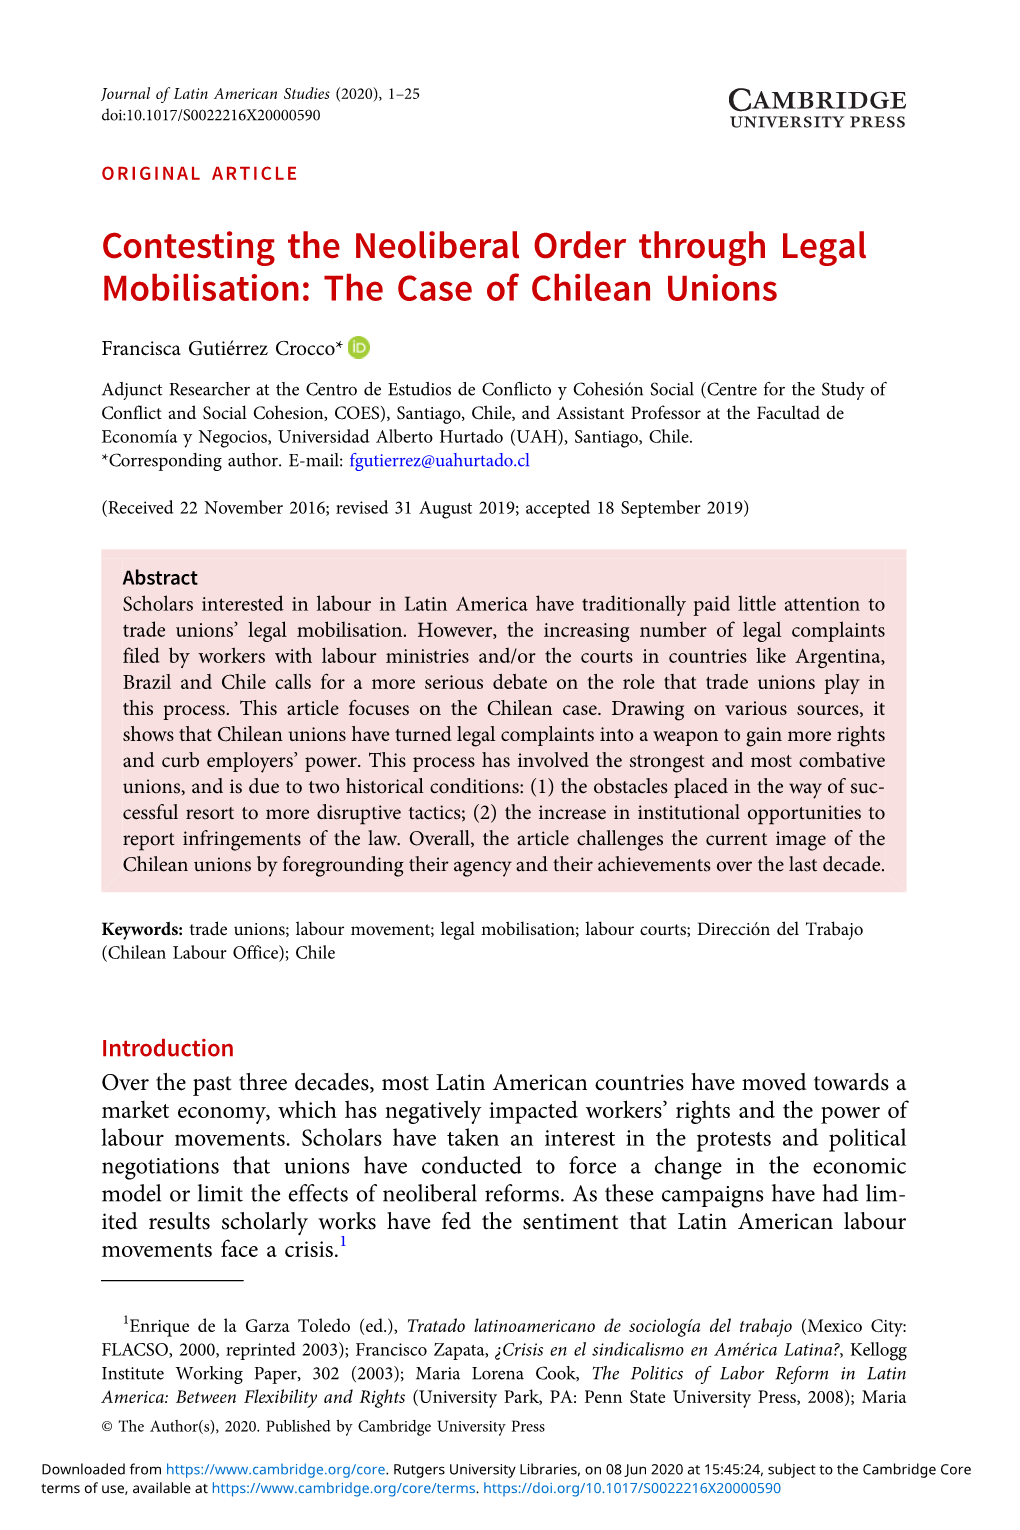 Contesting the Neoliberal Order Through Legal Mobilisation: the Case of Chilean Unions